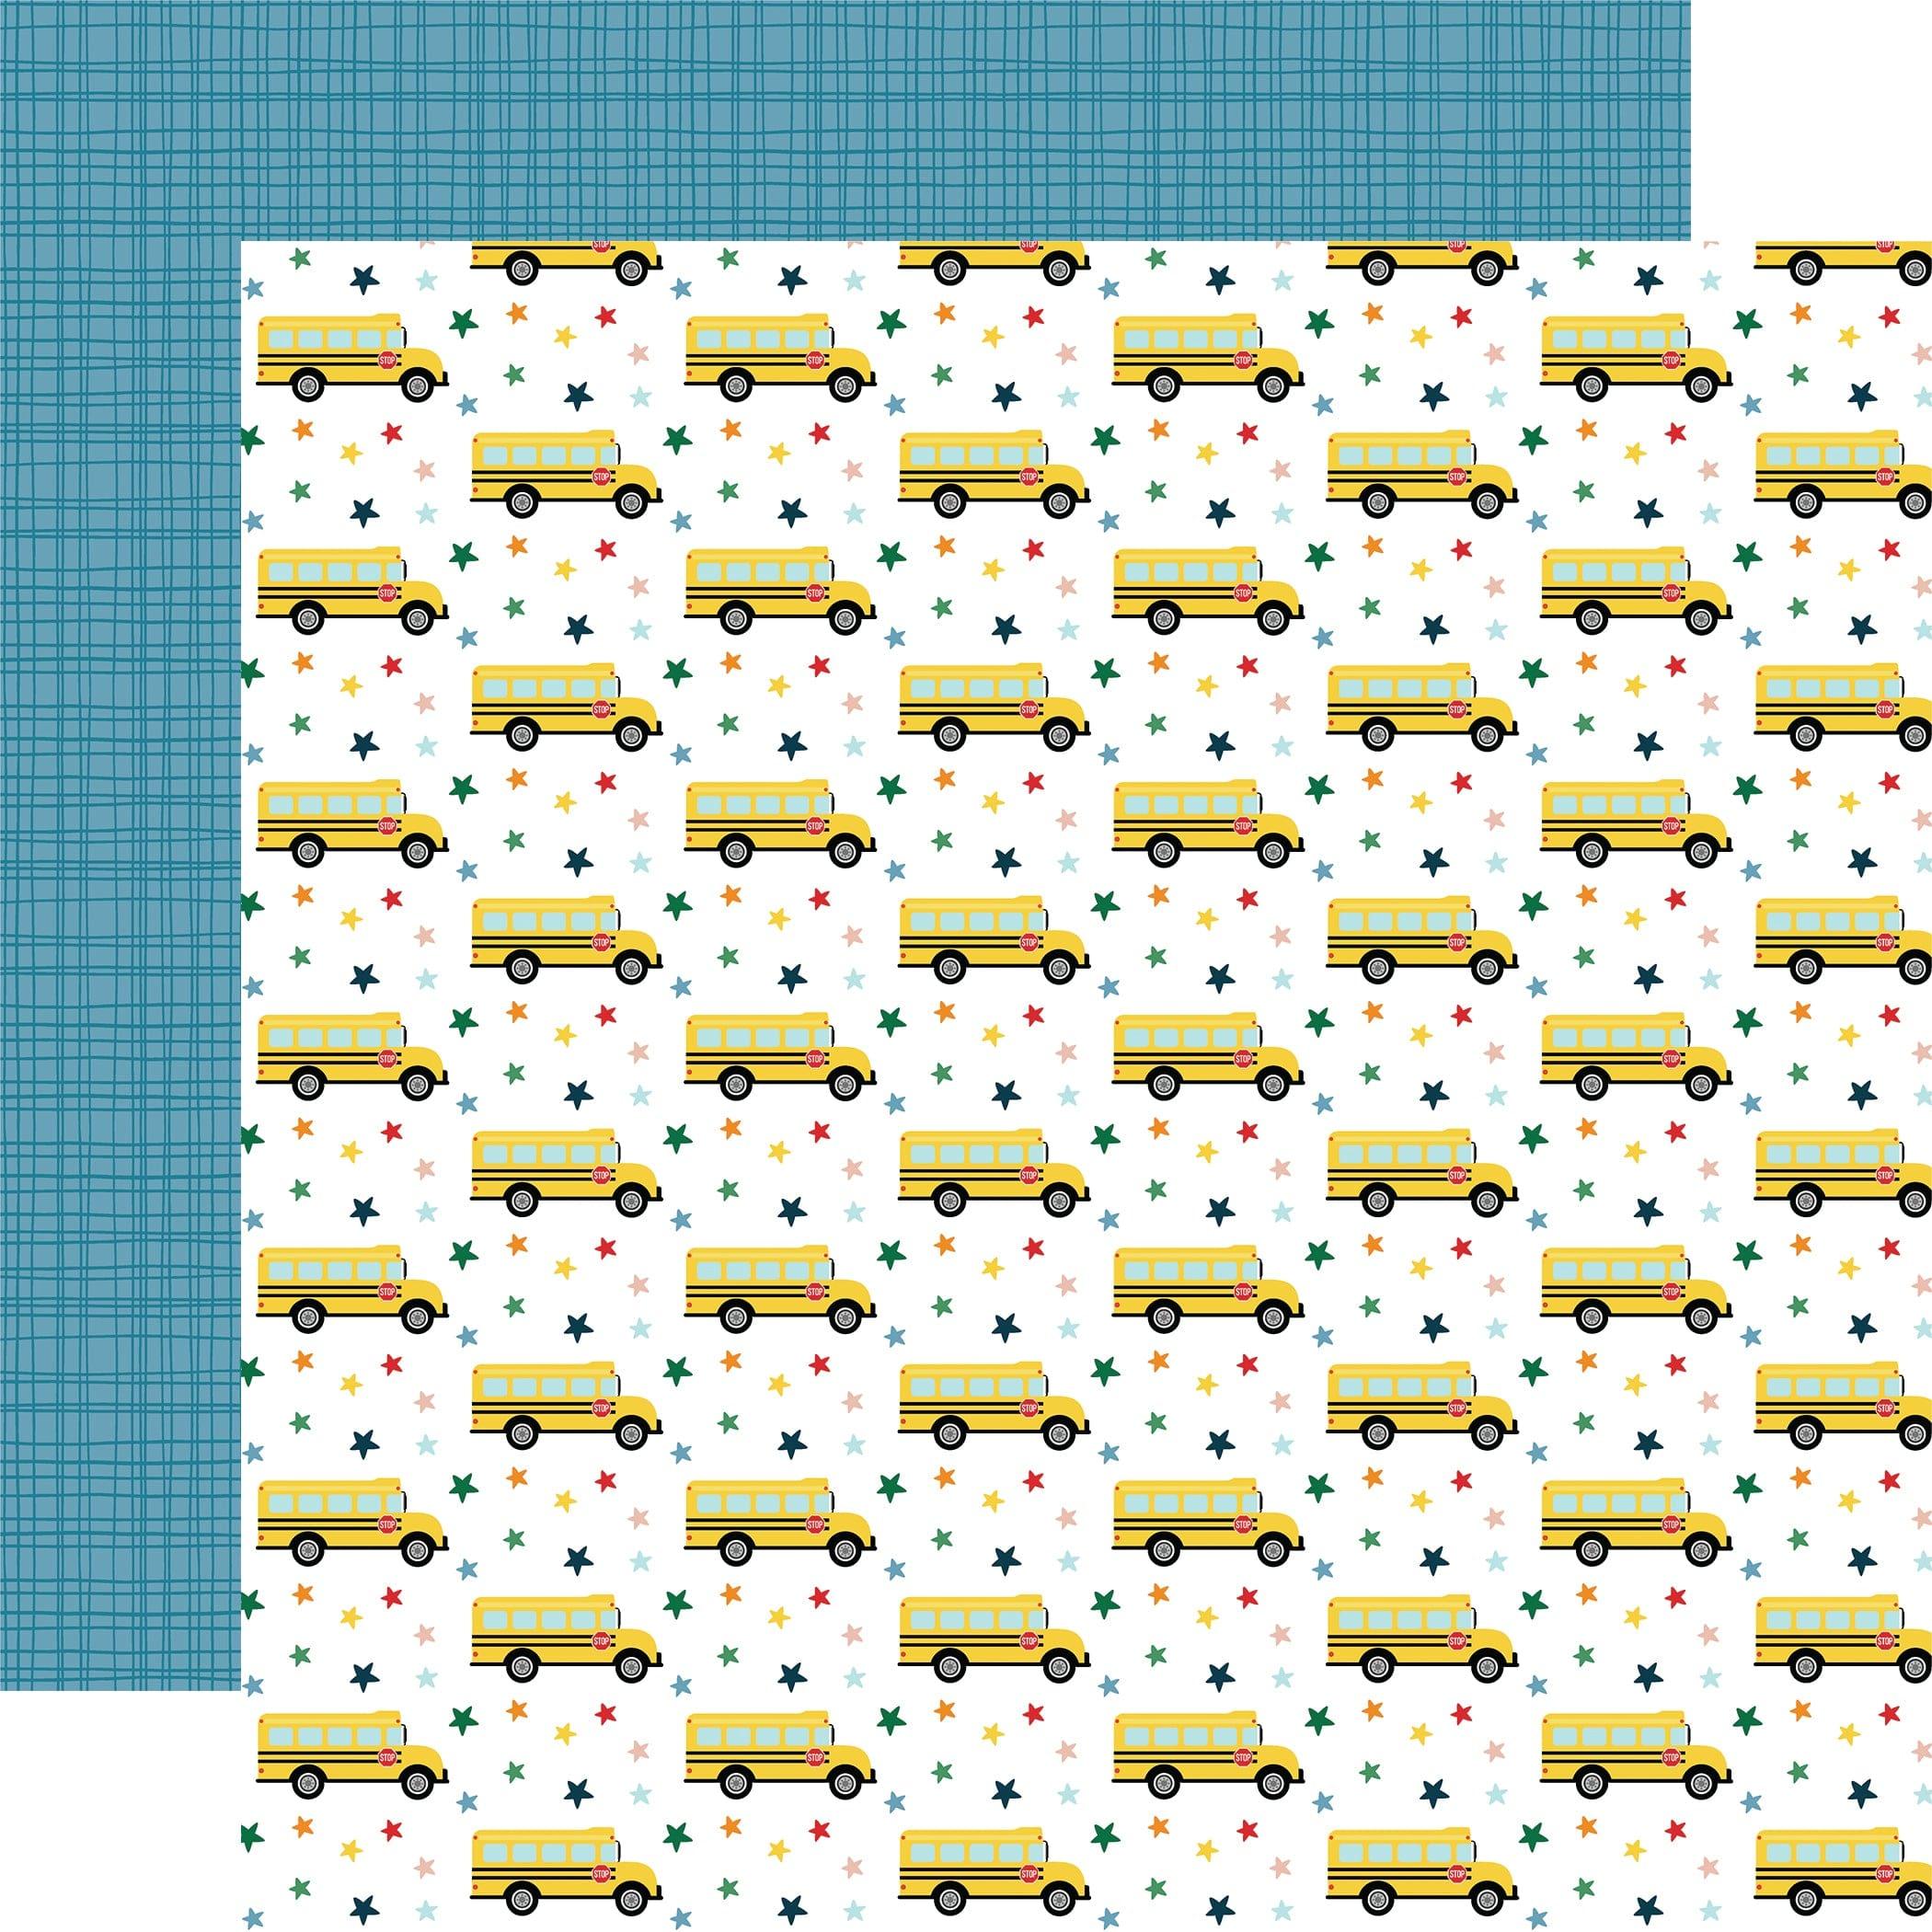 First Day Of School Collection Bus Stop 12 x 12 Double-Sided Scrapbook Paper by Echo Park Paper - Scrapbook Supply Companies